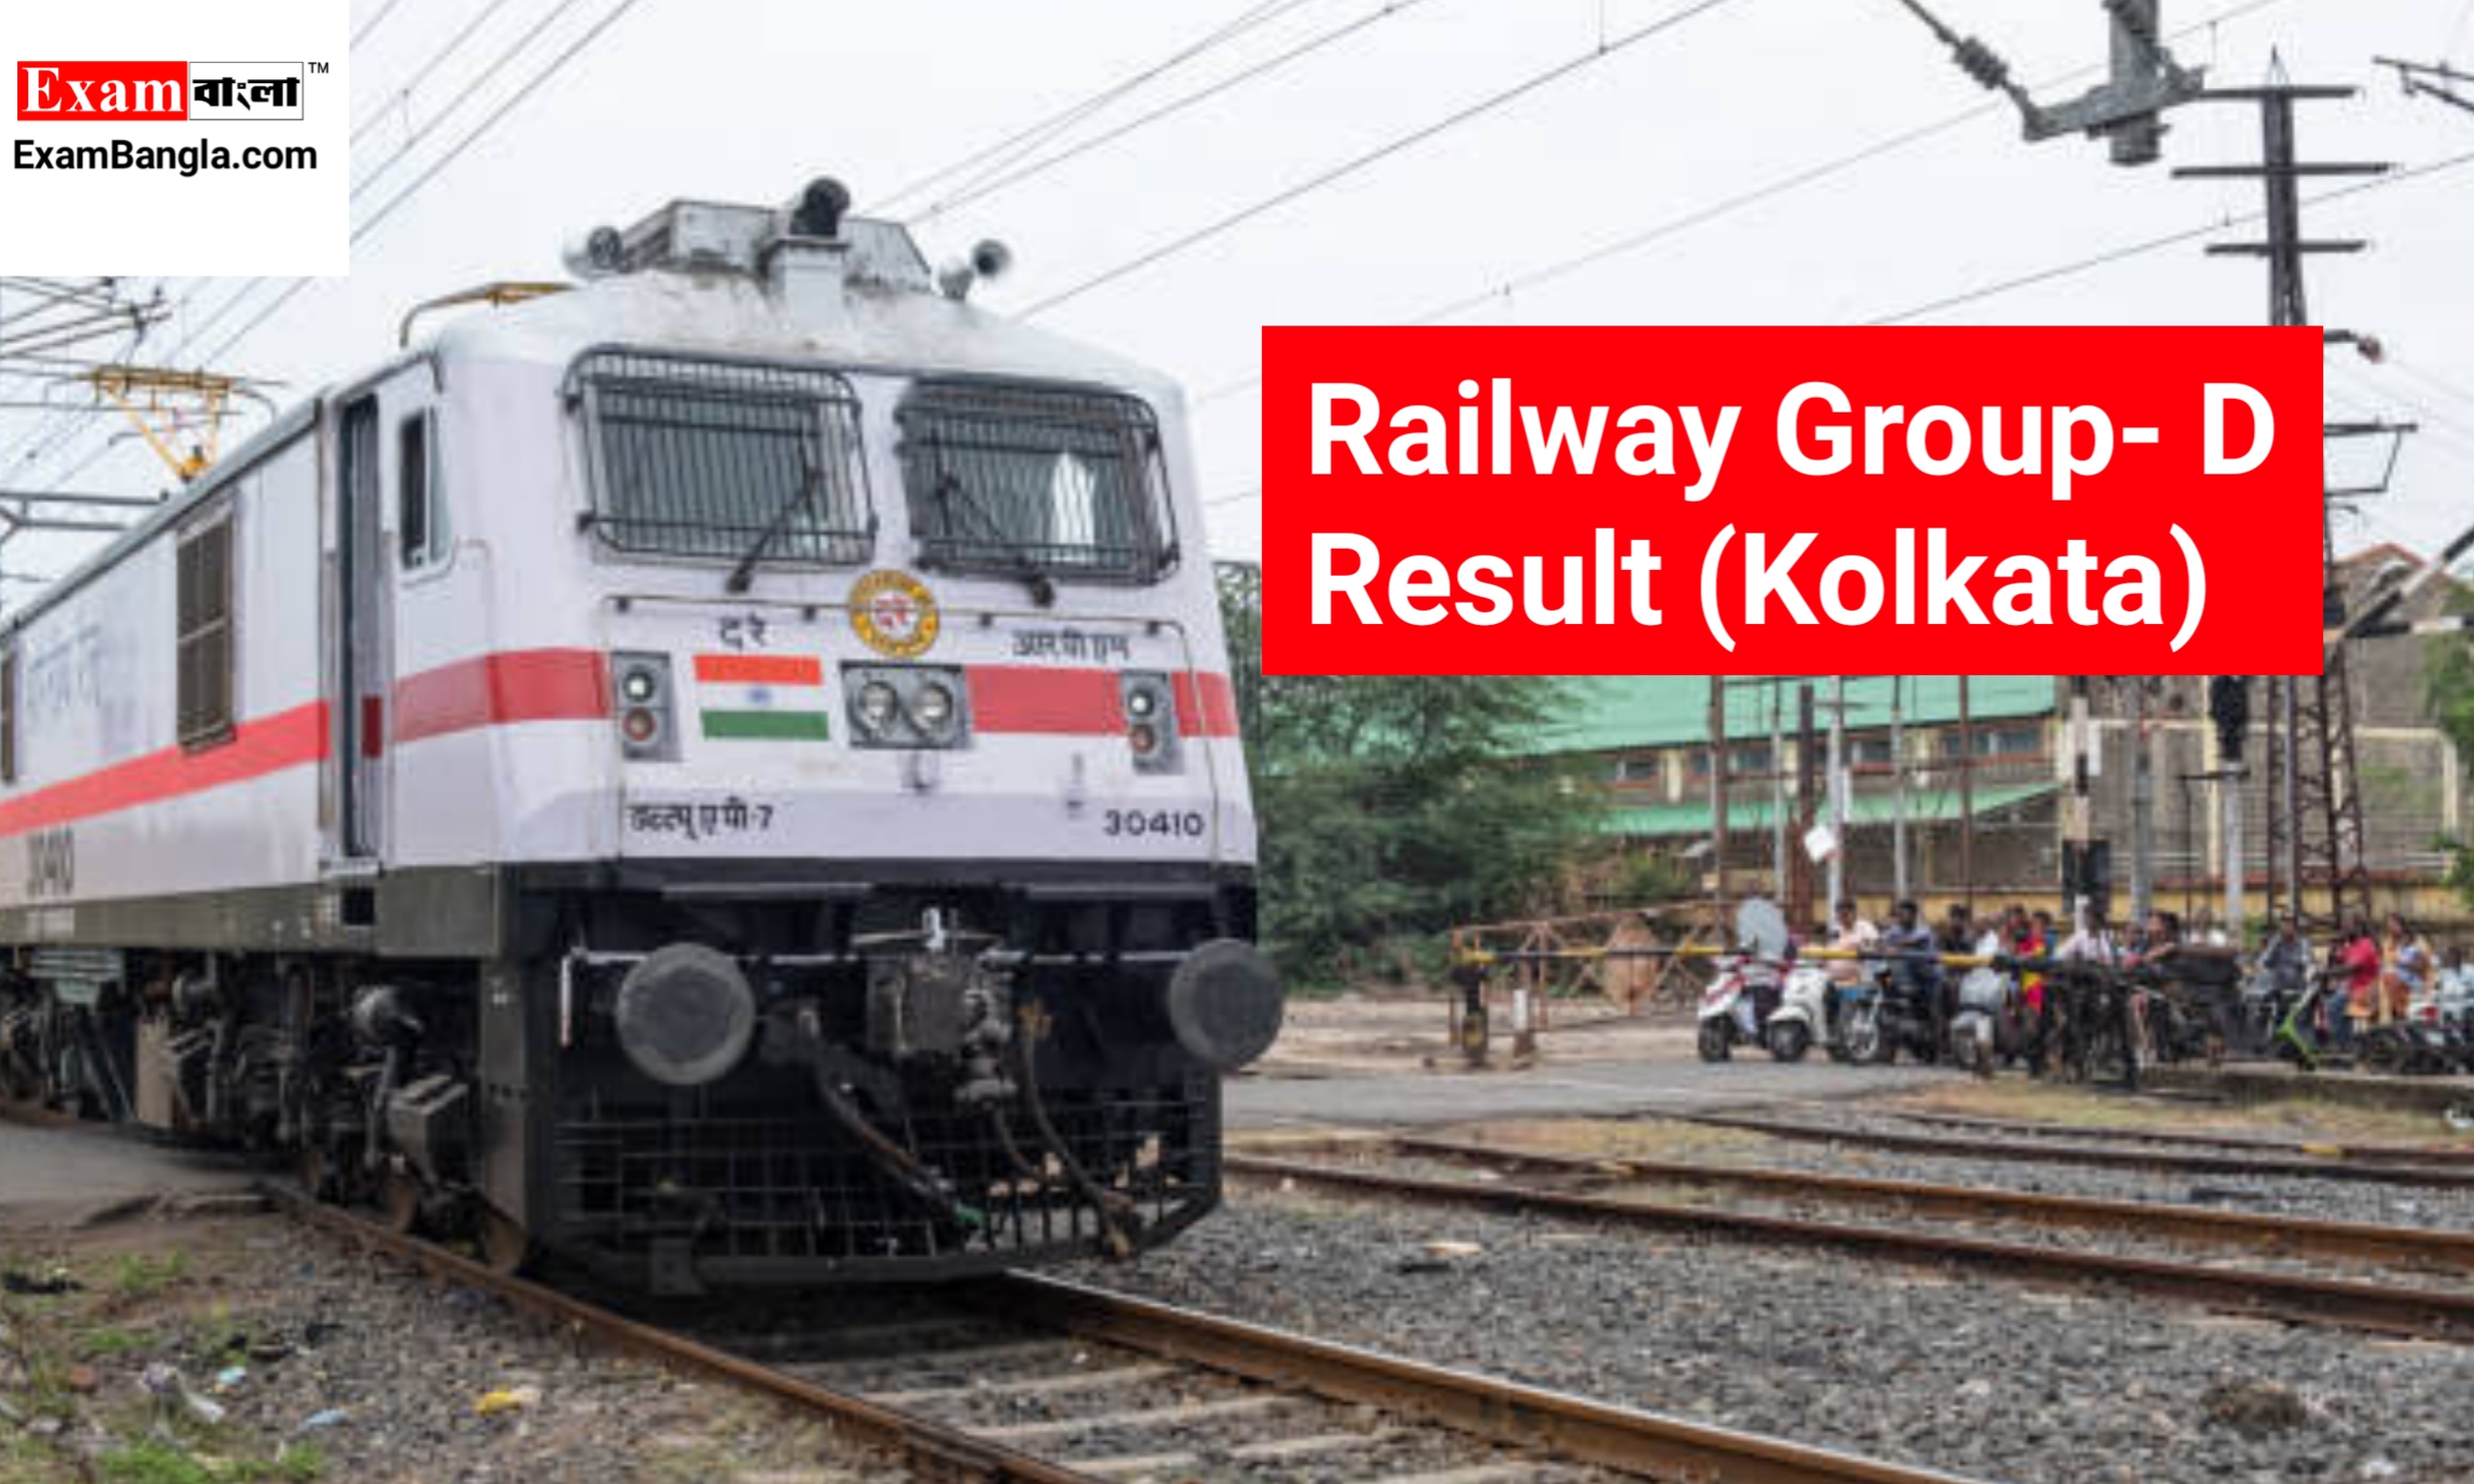 Railway Group- D Result